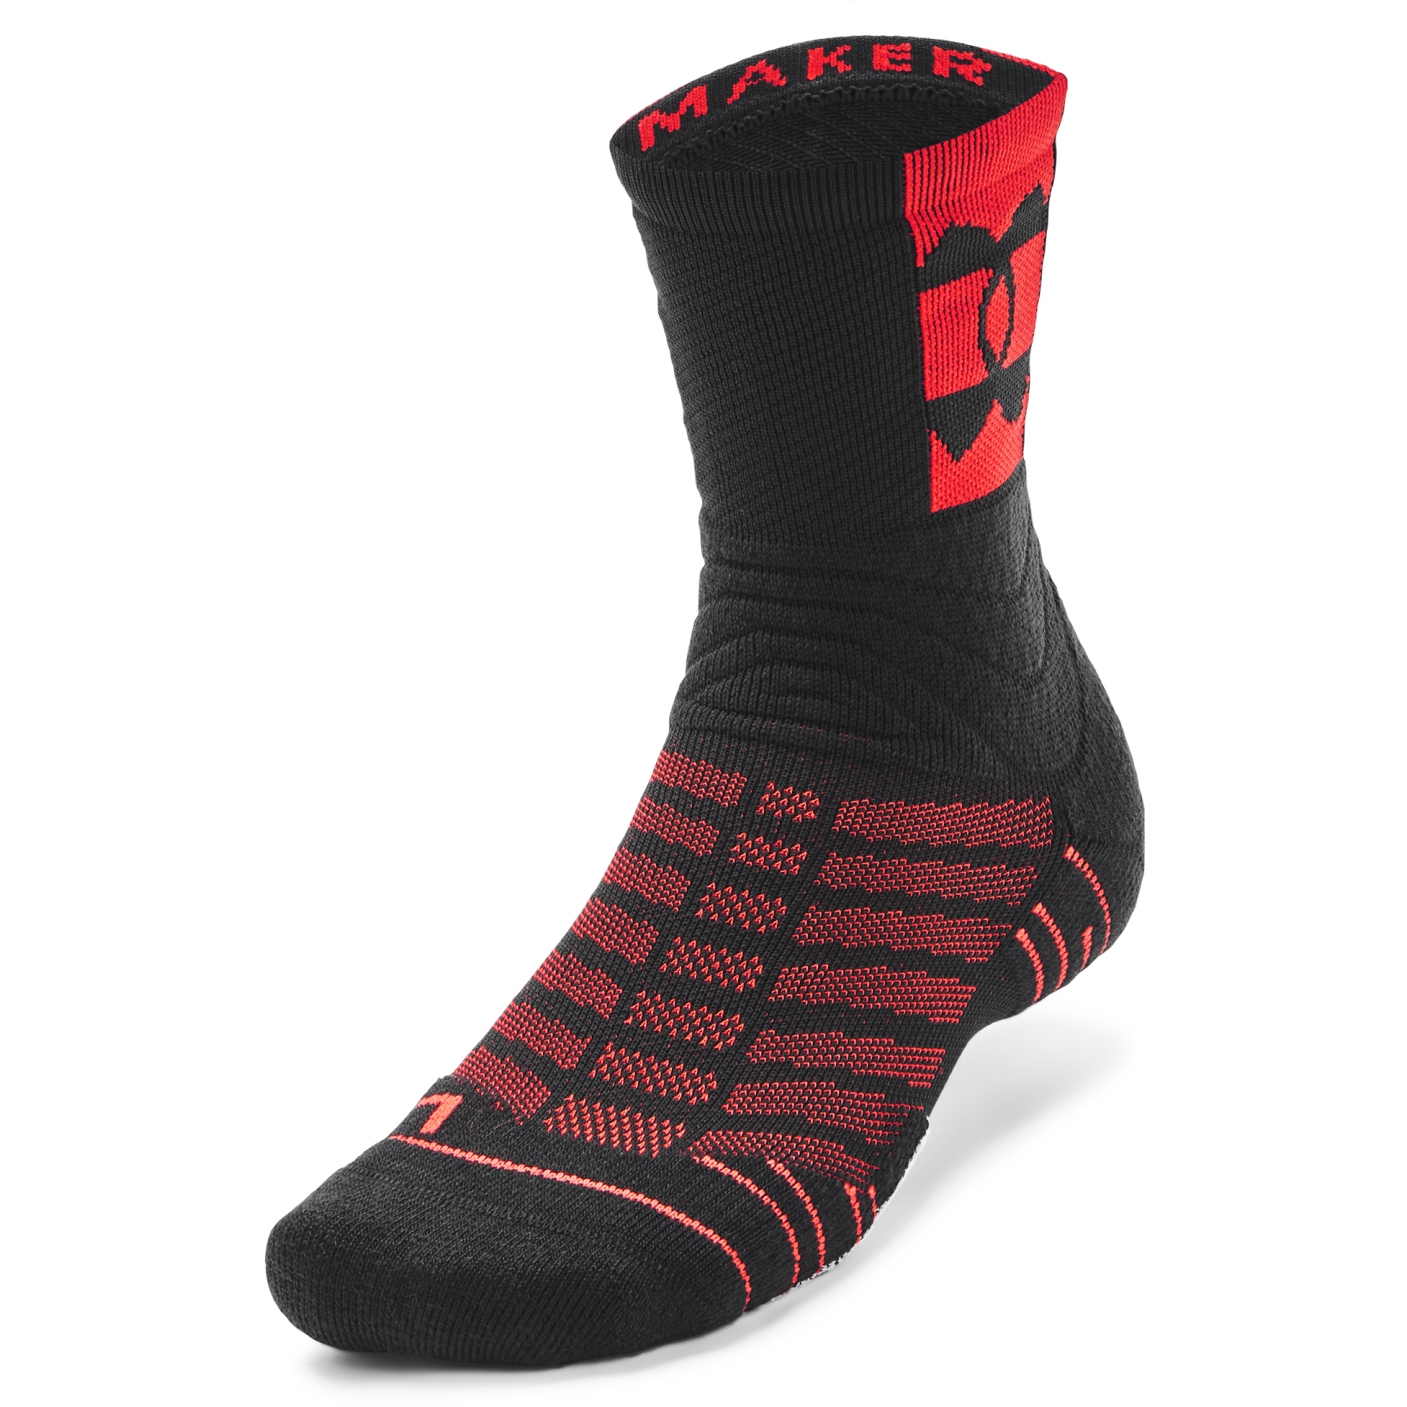 Picture of Under Armour UA Playmaker Crew Socks - Black/Bolt Red/Black